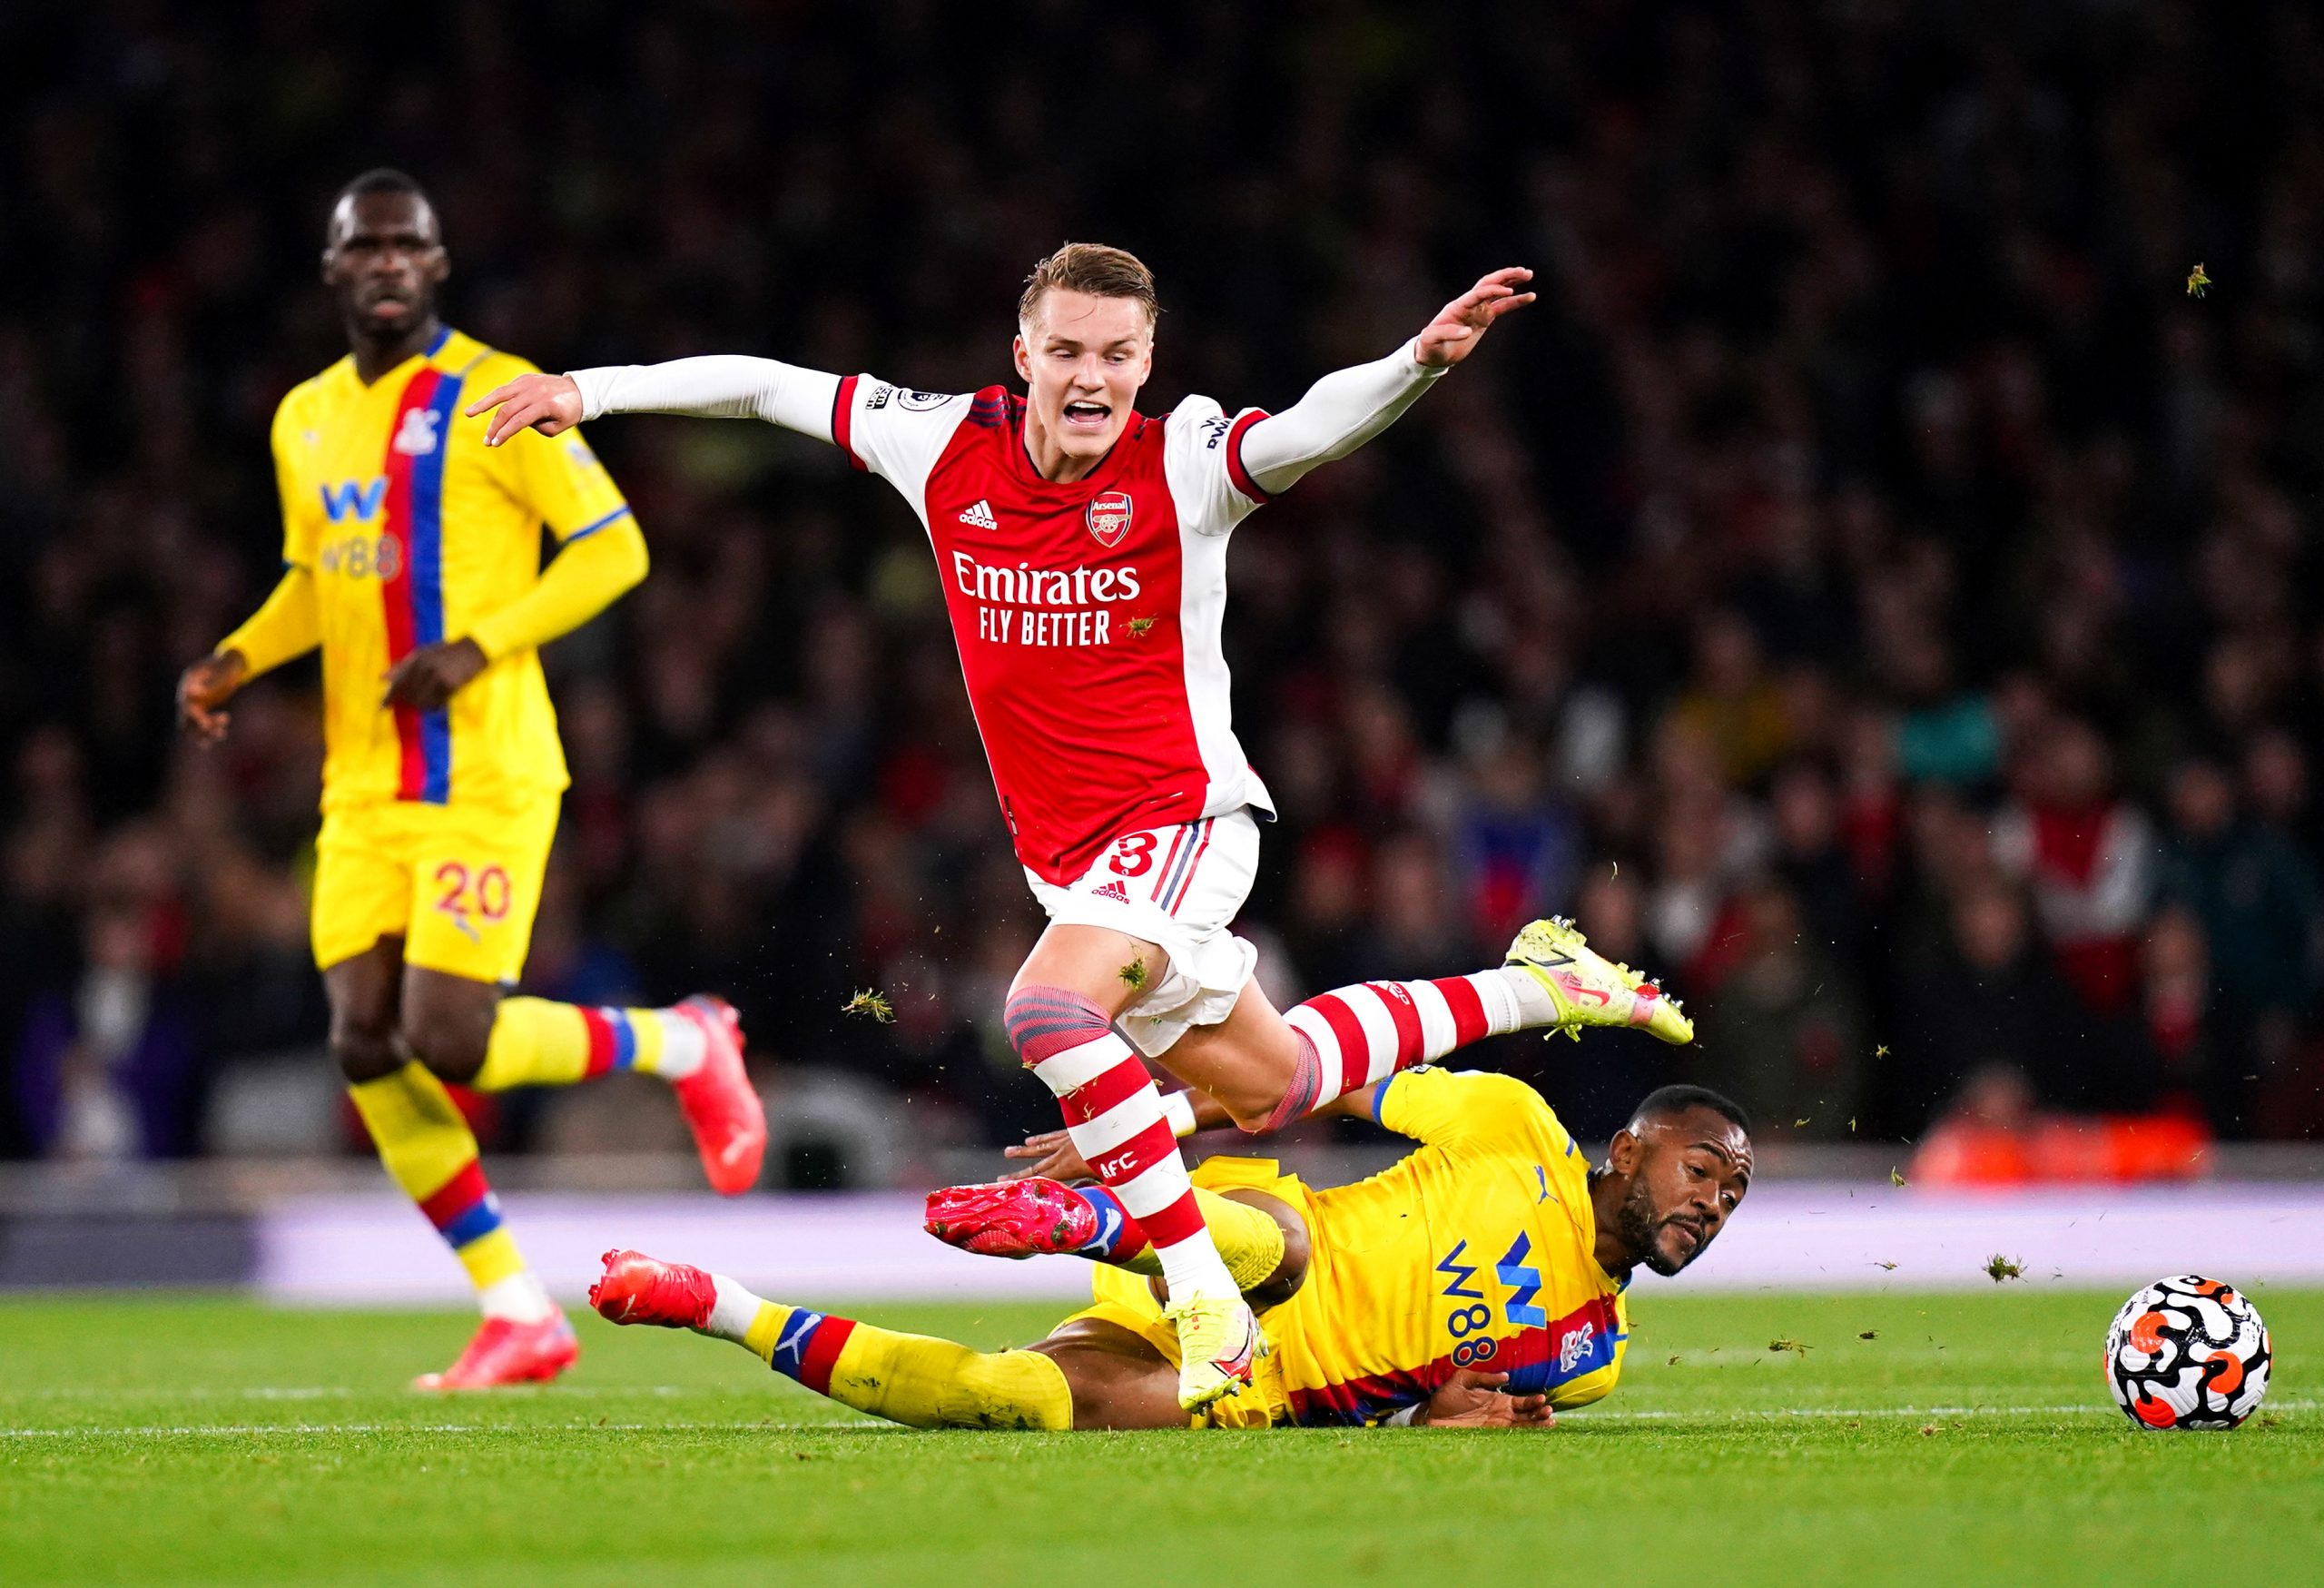 Crystal Palace – Arsenal : back to business